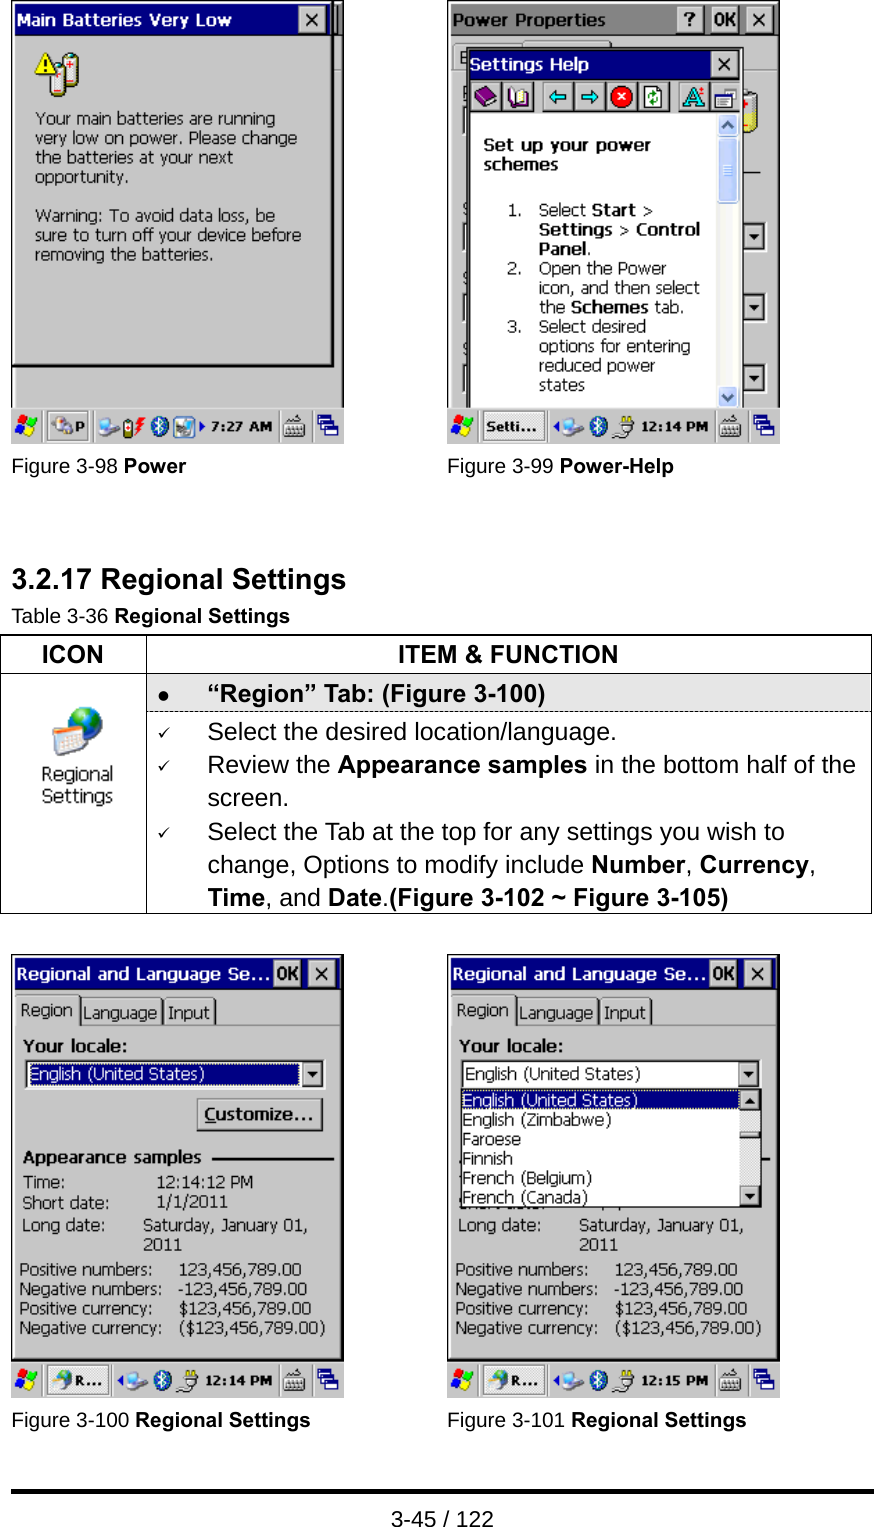  3-45 / 122    Figure 3-98 Power Figure 3-99 Power-Help   3.2.17 Regional Settings Table 3-36 Regional Settings ICON  ITEM &amp; FUNCTION z “Region” Tab: (Figure 3-100)  9 Select the desired location/language. 9 Review the Appearance samples in the bottom half of the screen. 9 Select the Tab at the top for any settings you wish to change, Options to modify include Number, Currency, Time, and Date.(Figure 3-102 ~ Figure 3-105)     Figure 3-100 Regional Settings Figure 3-101 Regional Settings 